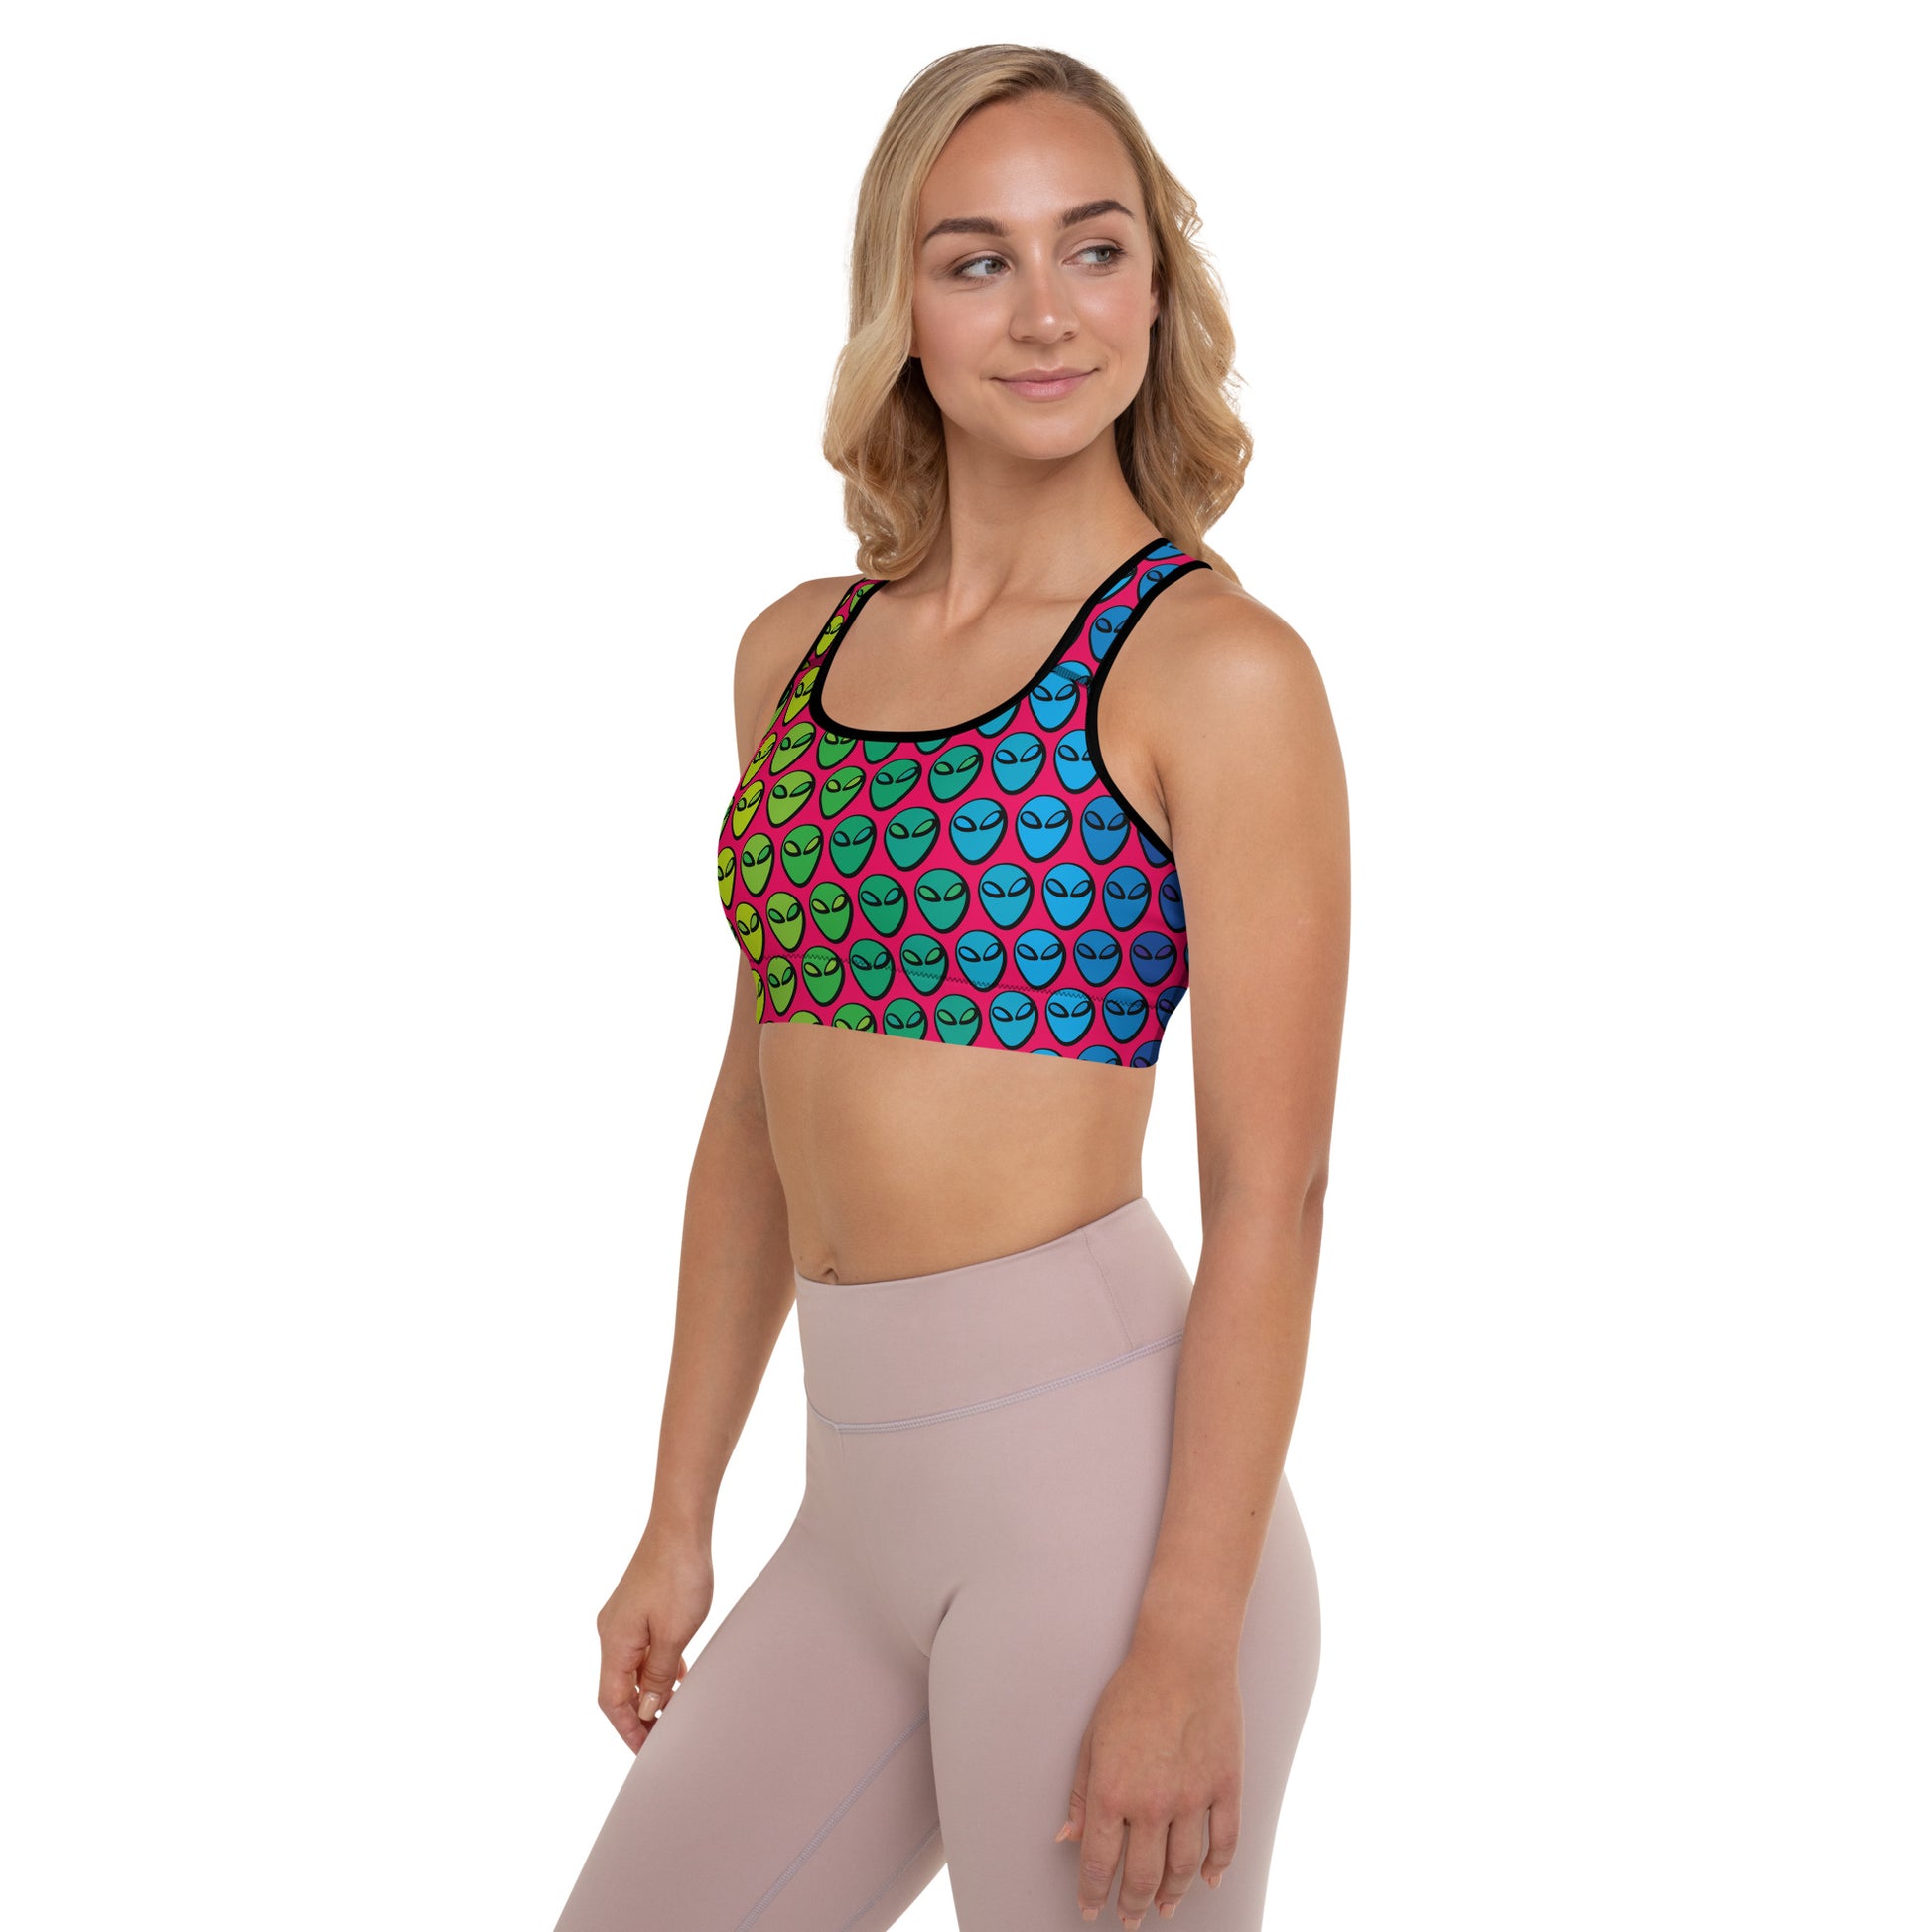 Weirdo | Colorful sports bra for weirdos who are into aliens! Alien heads are printed all over on this padded sports bra.